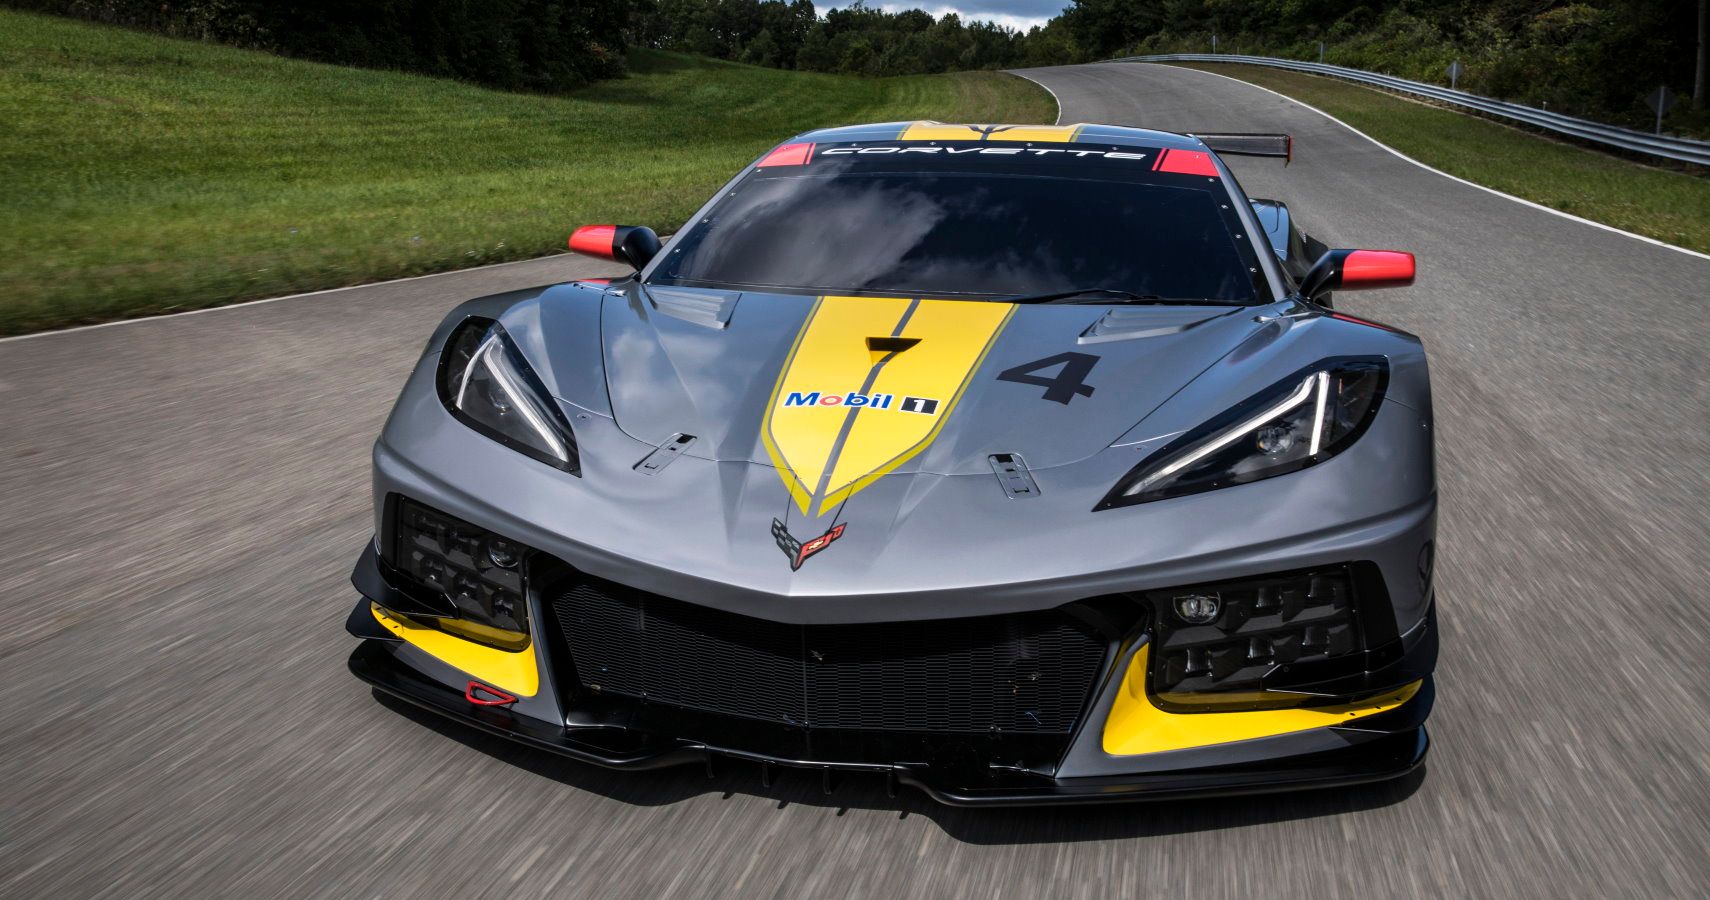 The Corvette C8.R is Chevy???s first mid-engine GTLM race car. The No. 4 car dons a new silver livery, inspired by the color of iconic Corvette concepts. The No. 3 car will feature a traditional yellow color scheme with silver accents.